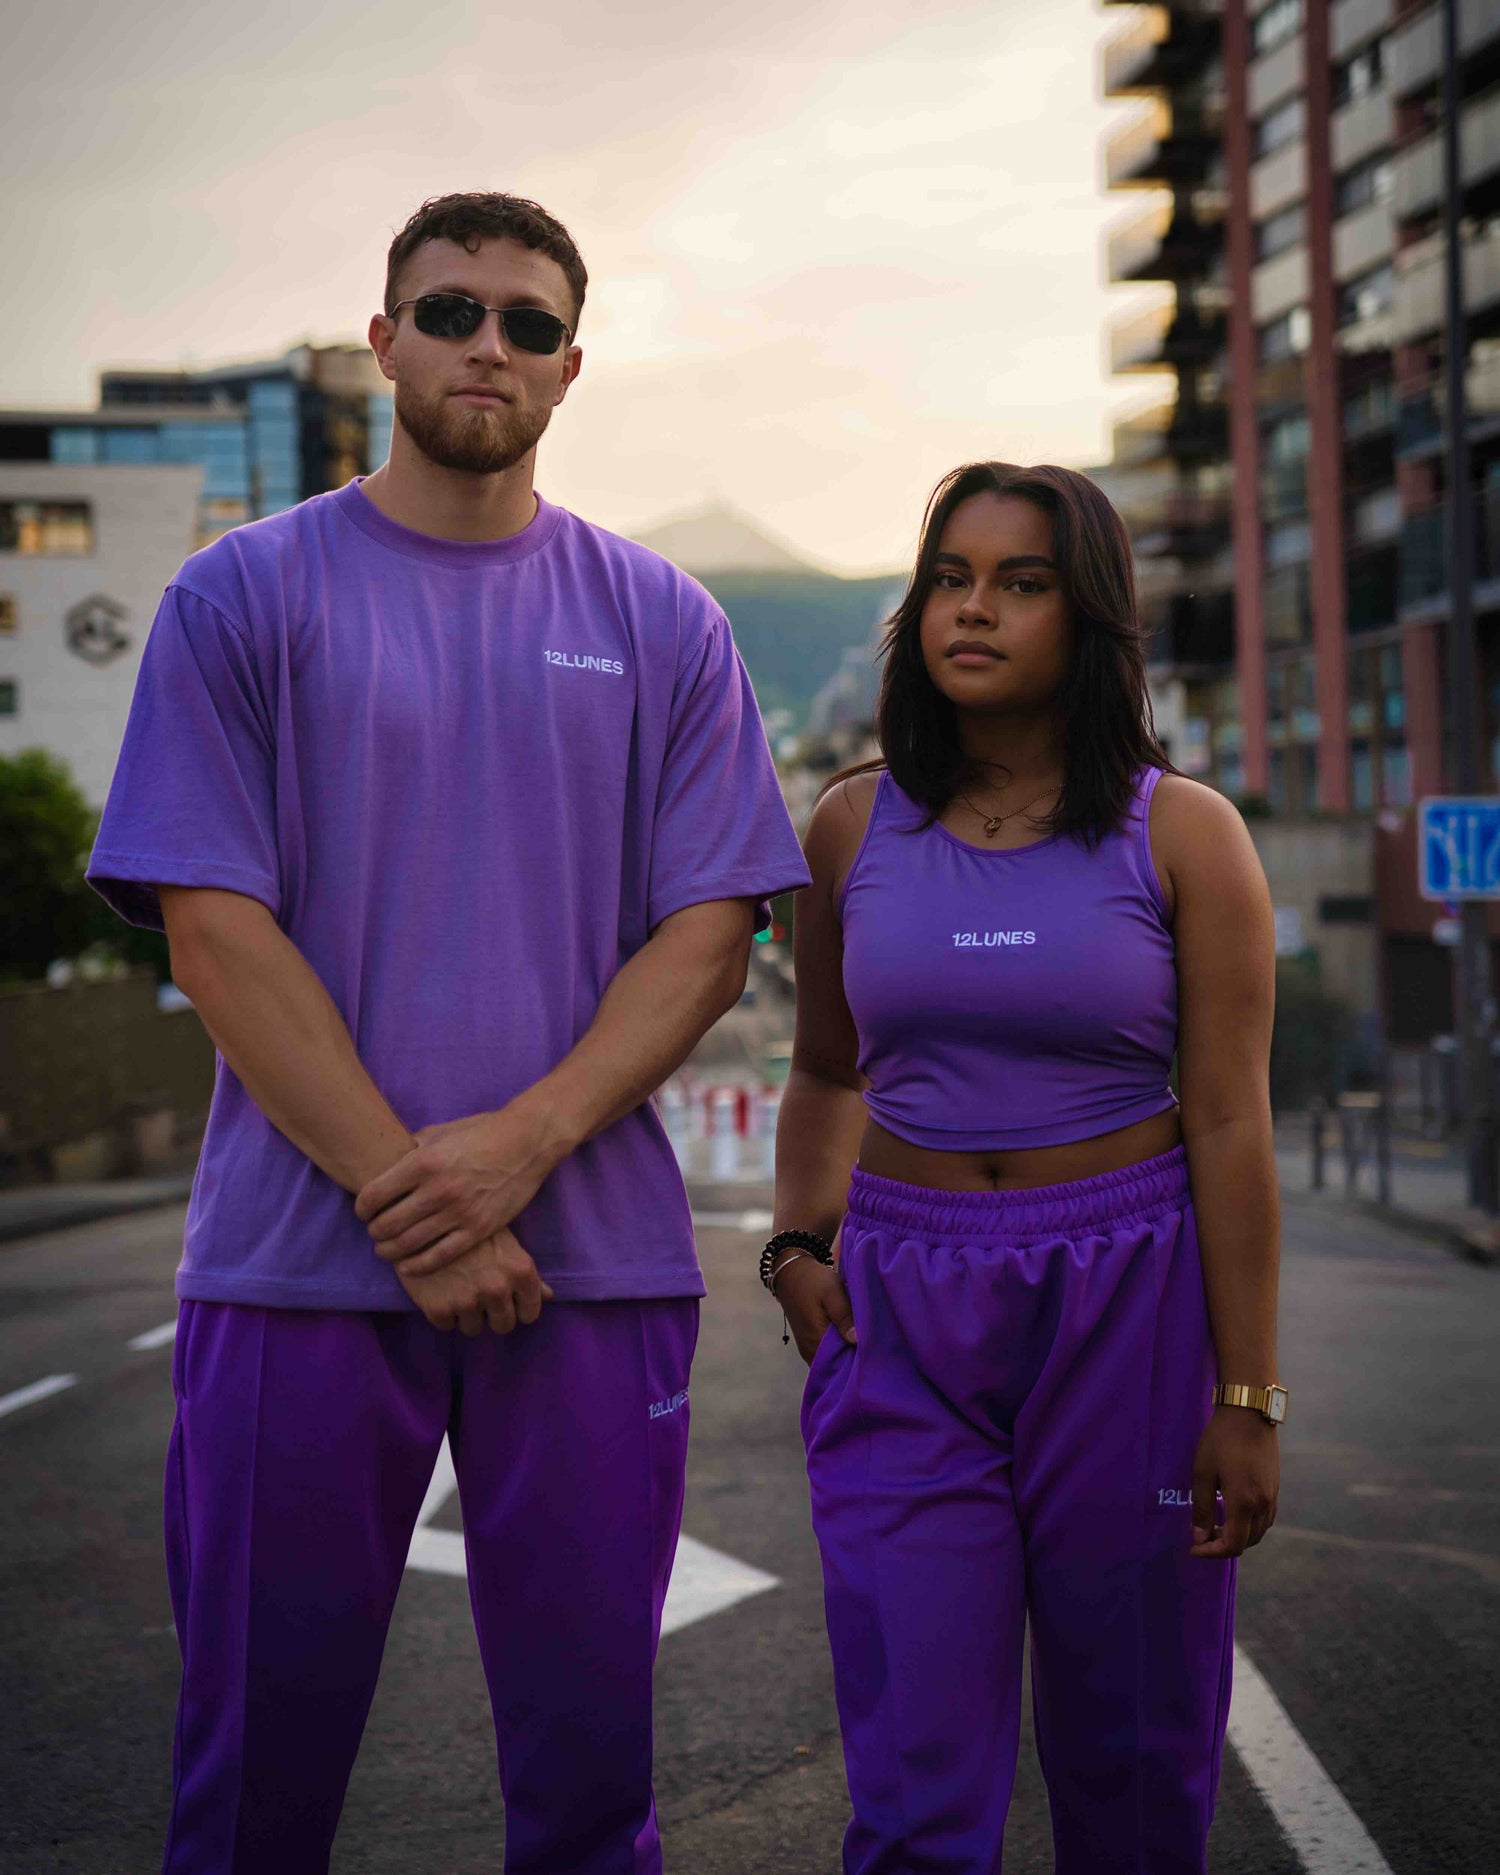 Trackpant : L'indispensable tendance streetwear à adopter d'urgence